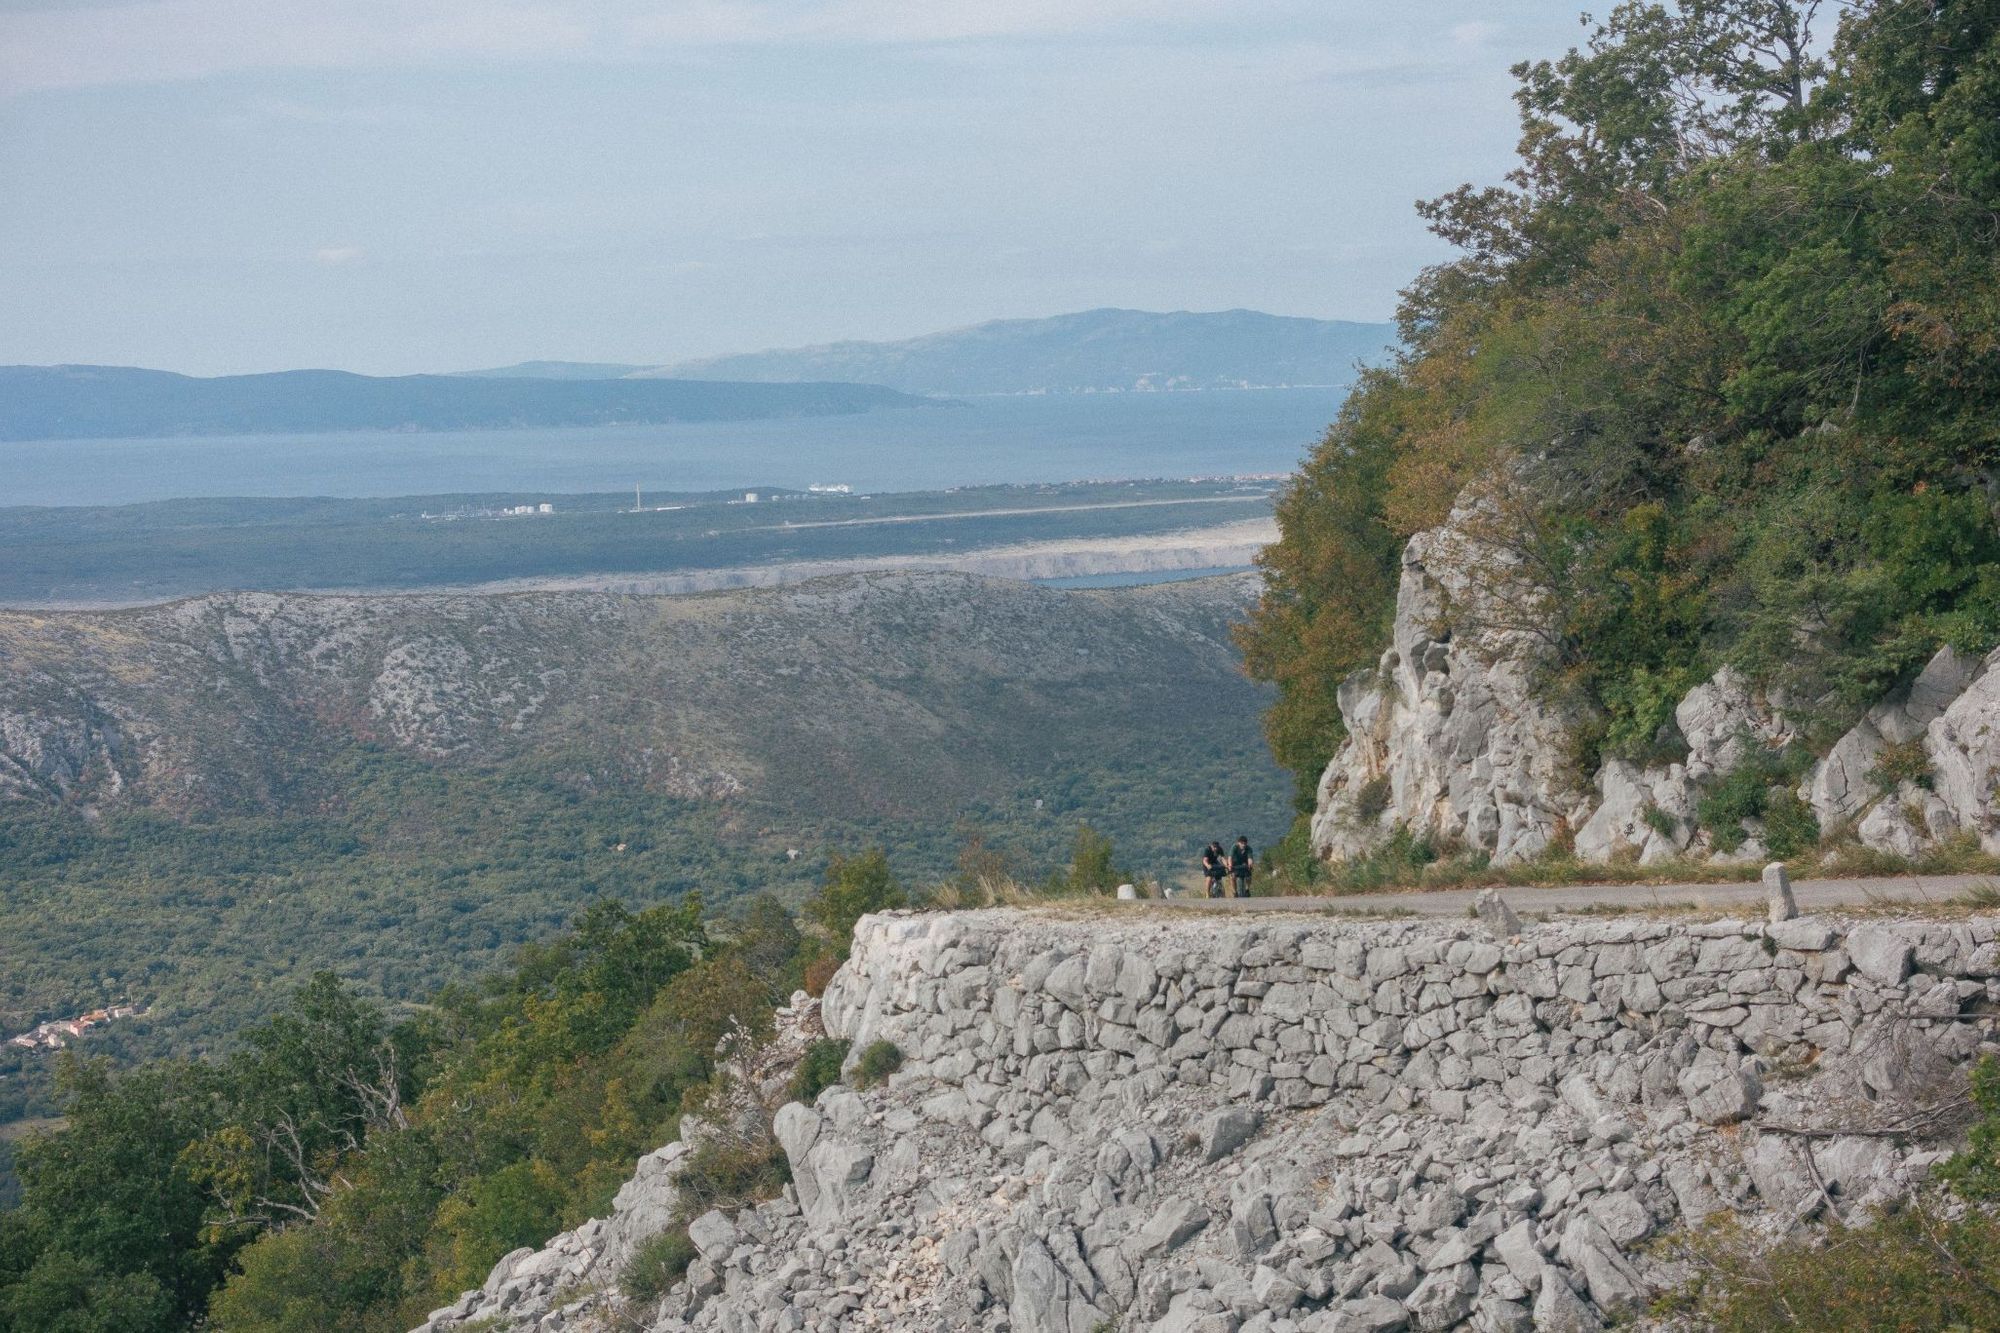 Two of the Restrap team make their way up an exposed mountain road in Croatia, with the Adriatic Sea behind. Photo: Restrap